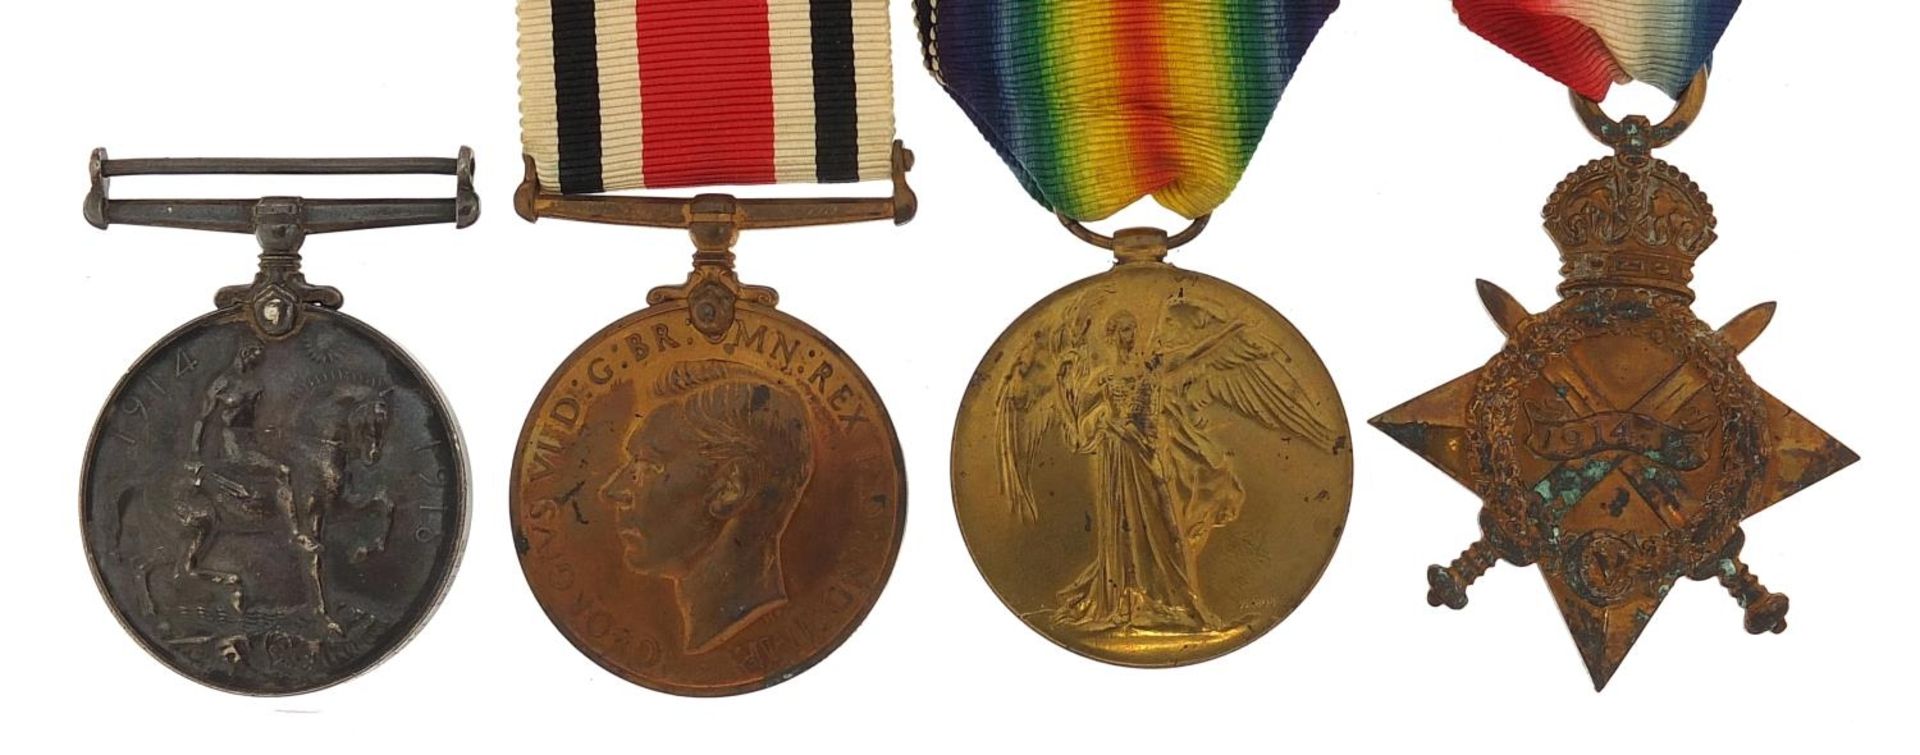 British military World War I four medal group awarded to 2466 CPL.W.COPLAND.HIGH.L.I.